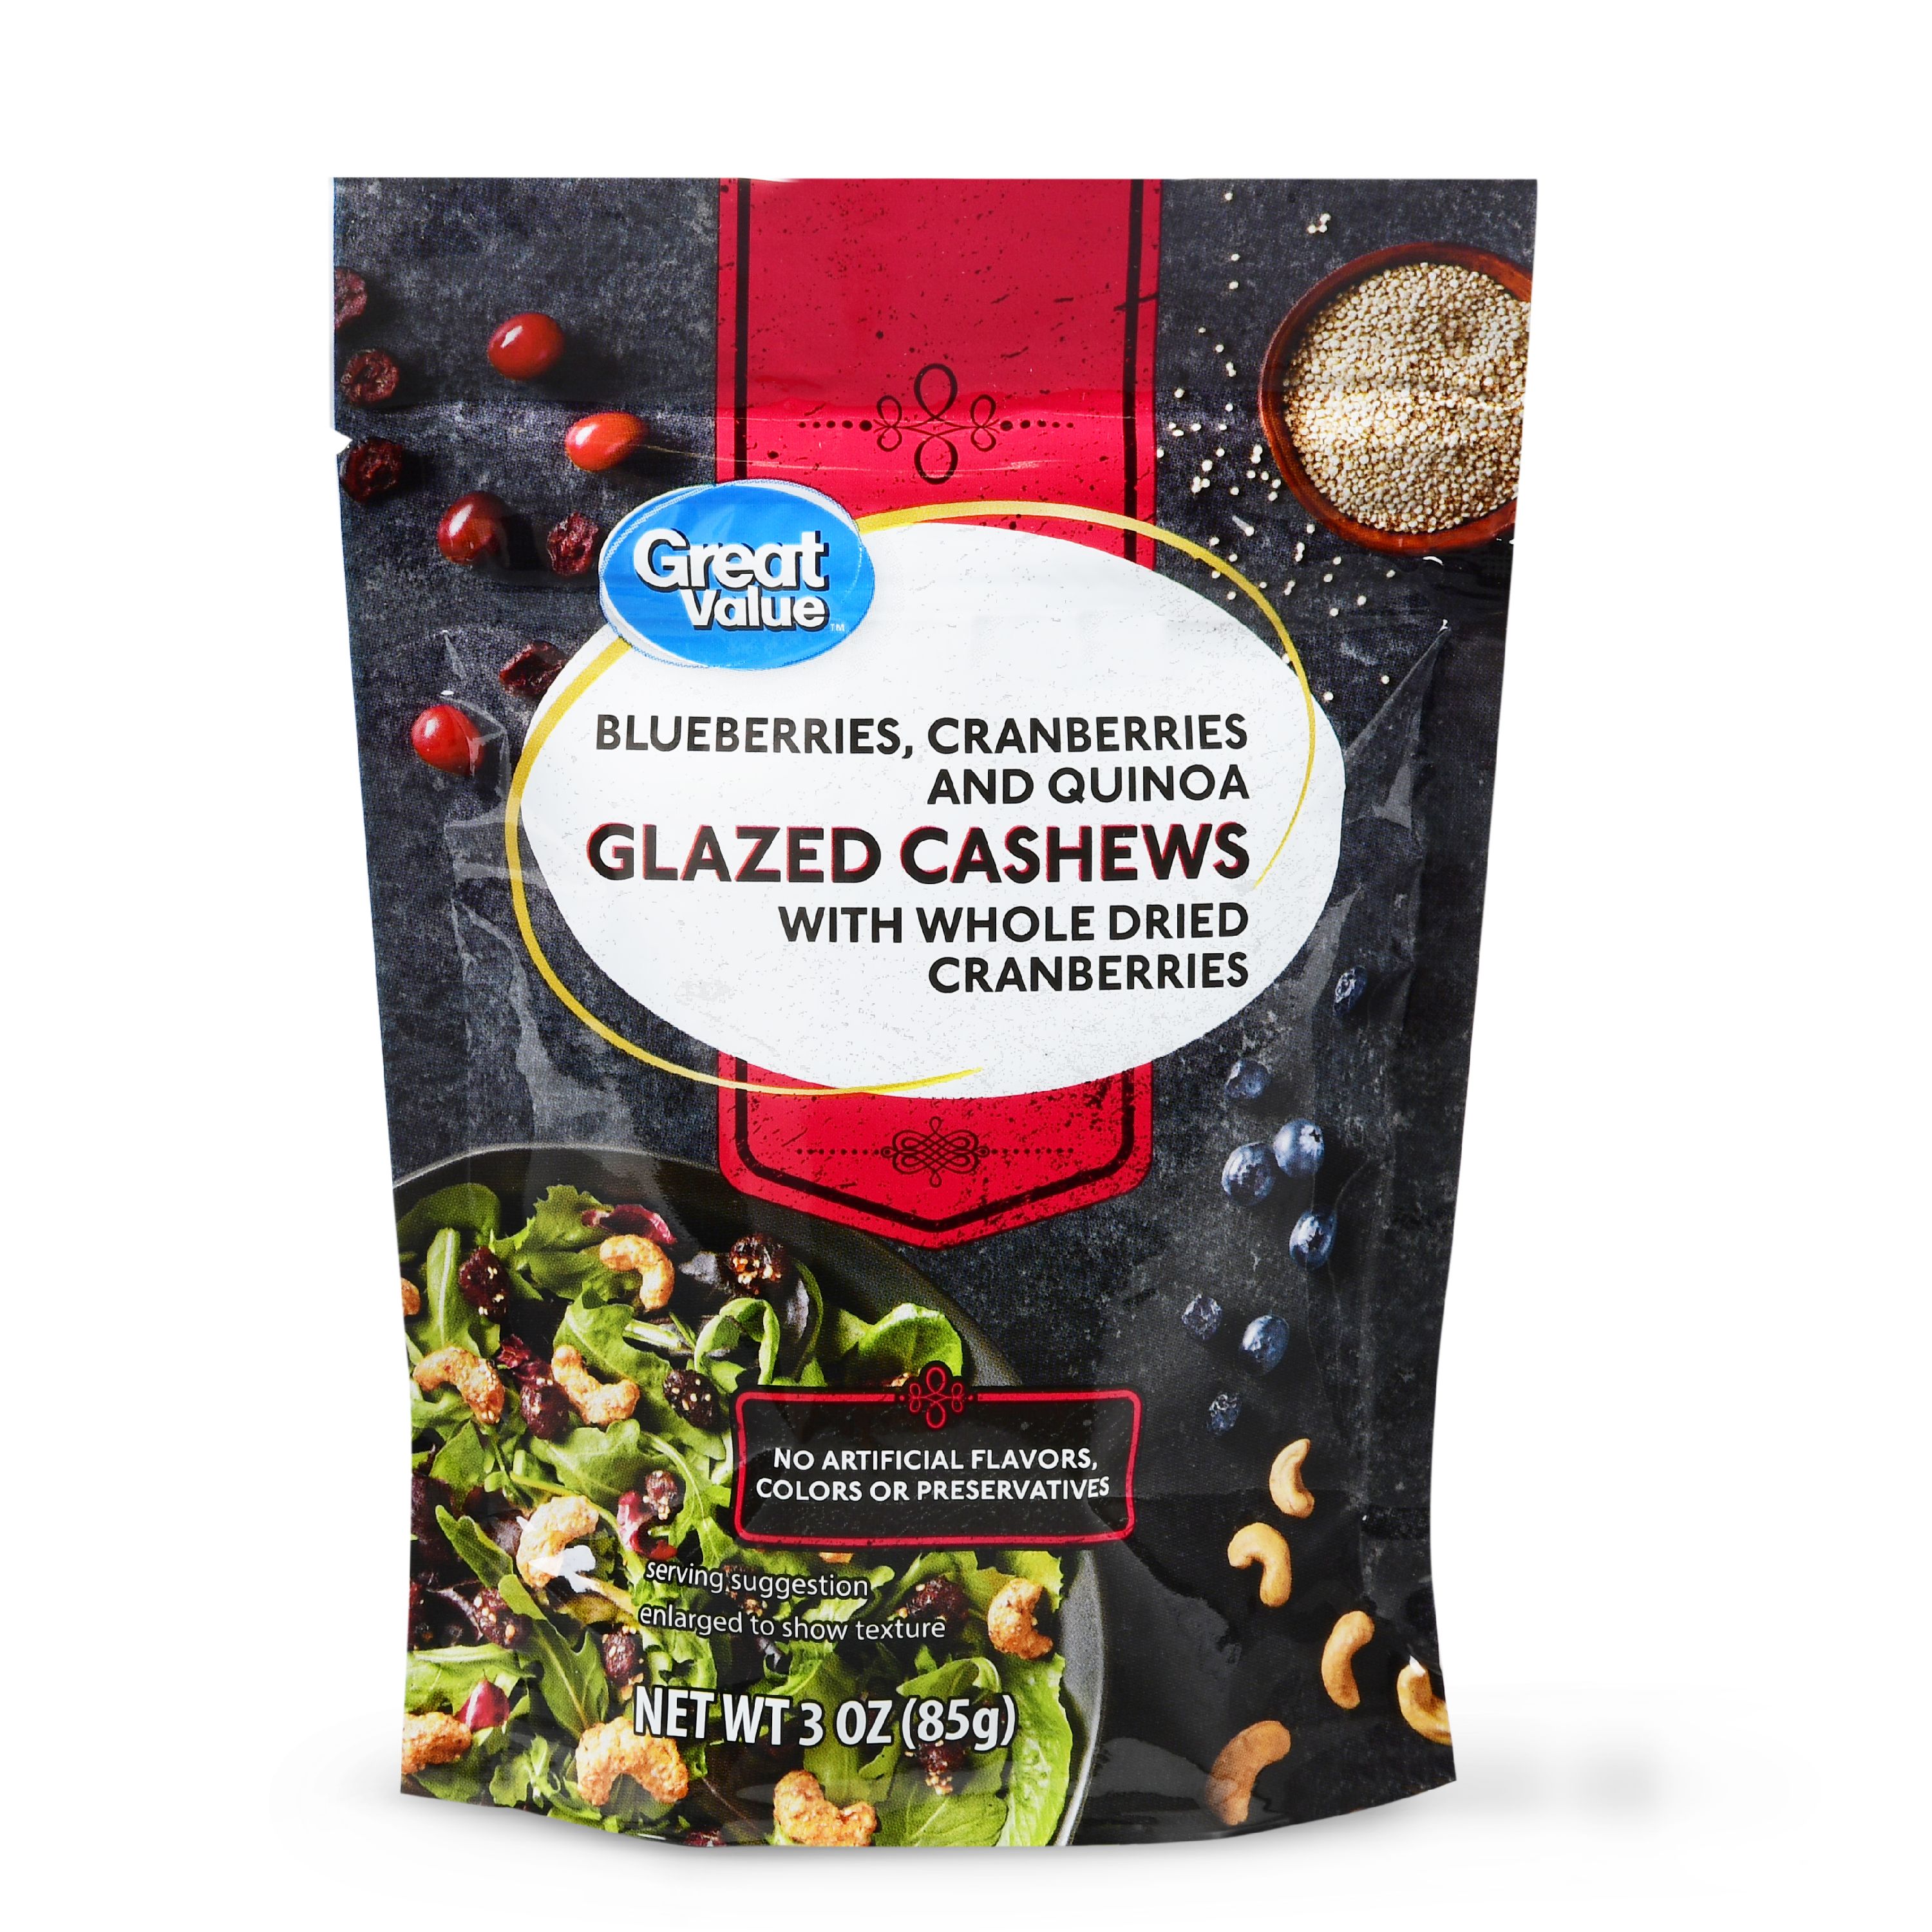 (2 Pack) Great Value Glazed Cashews with Whole Dried Cranberries, 3 Oz